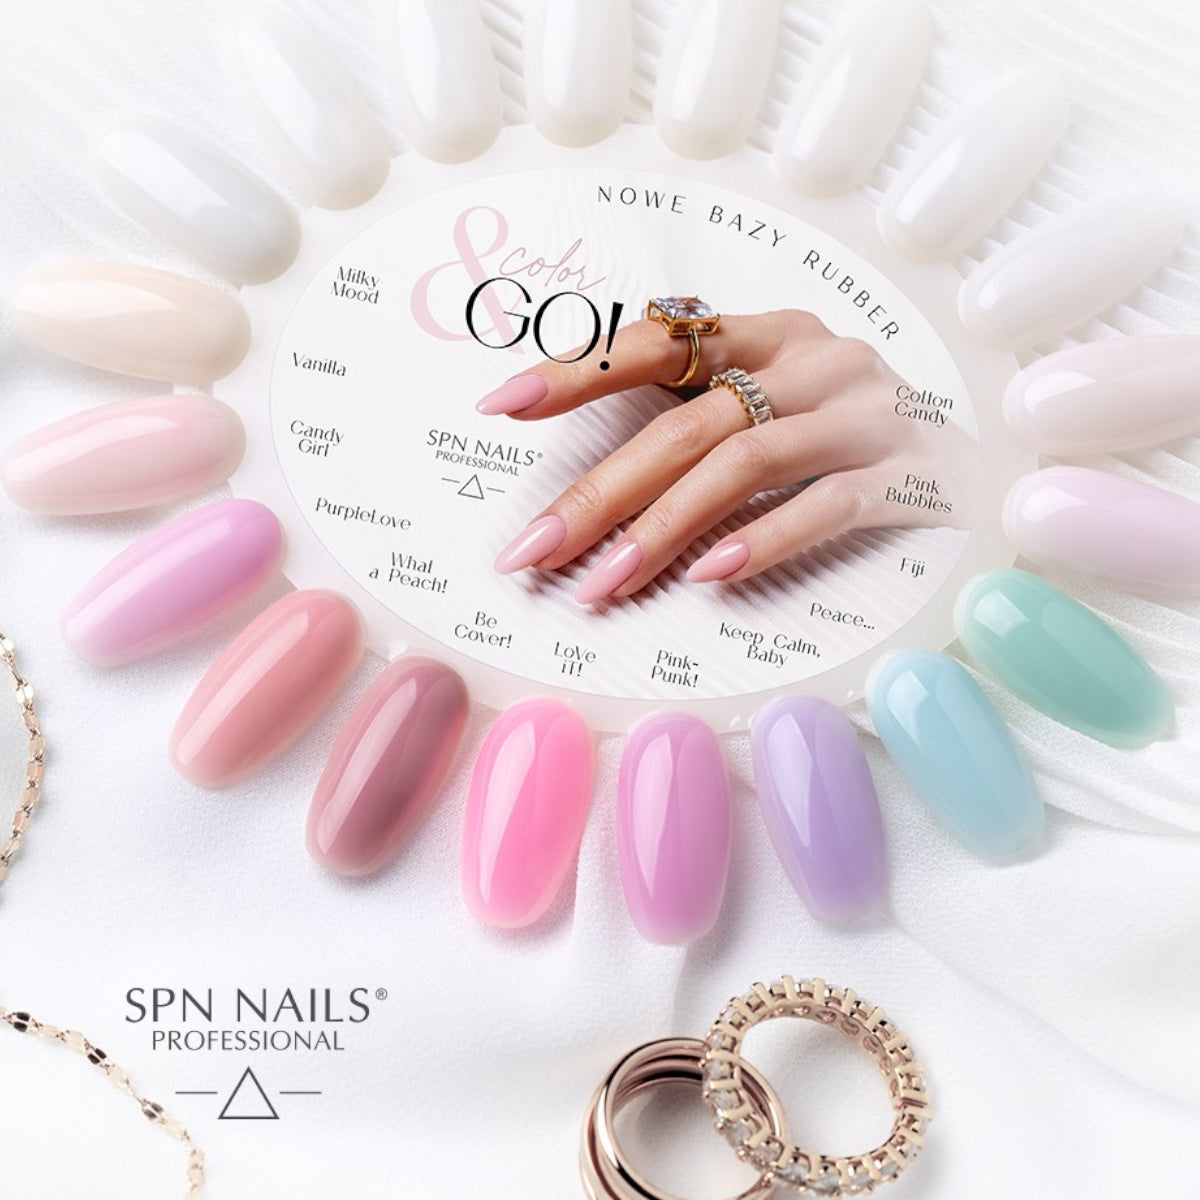 SPN Nails Rubber Base COLOR & GO! Pink Bubbles Series Swatches